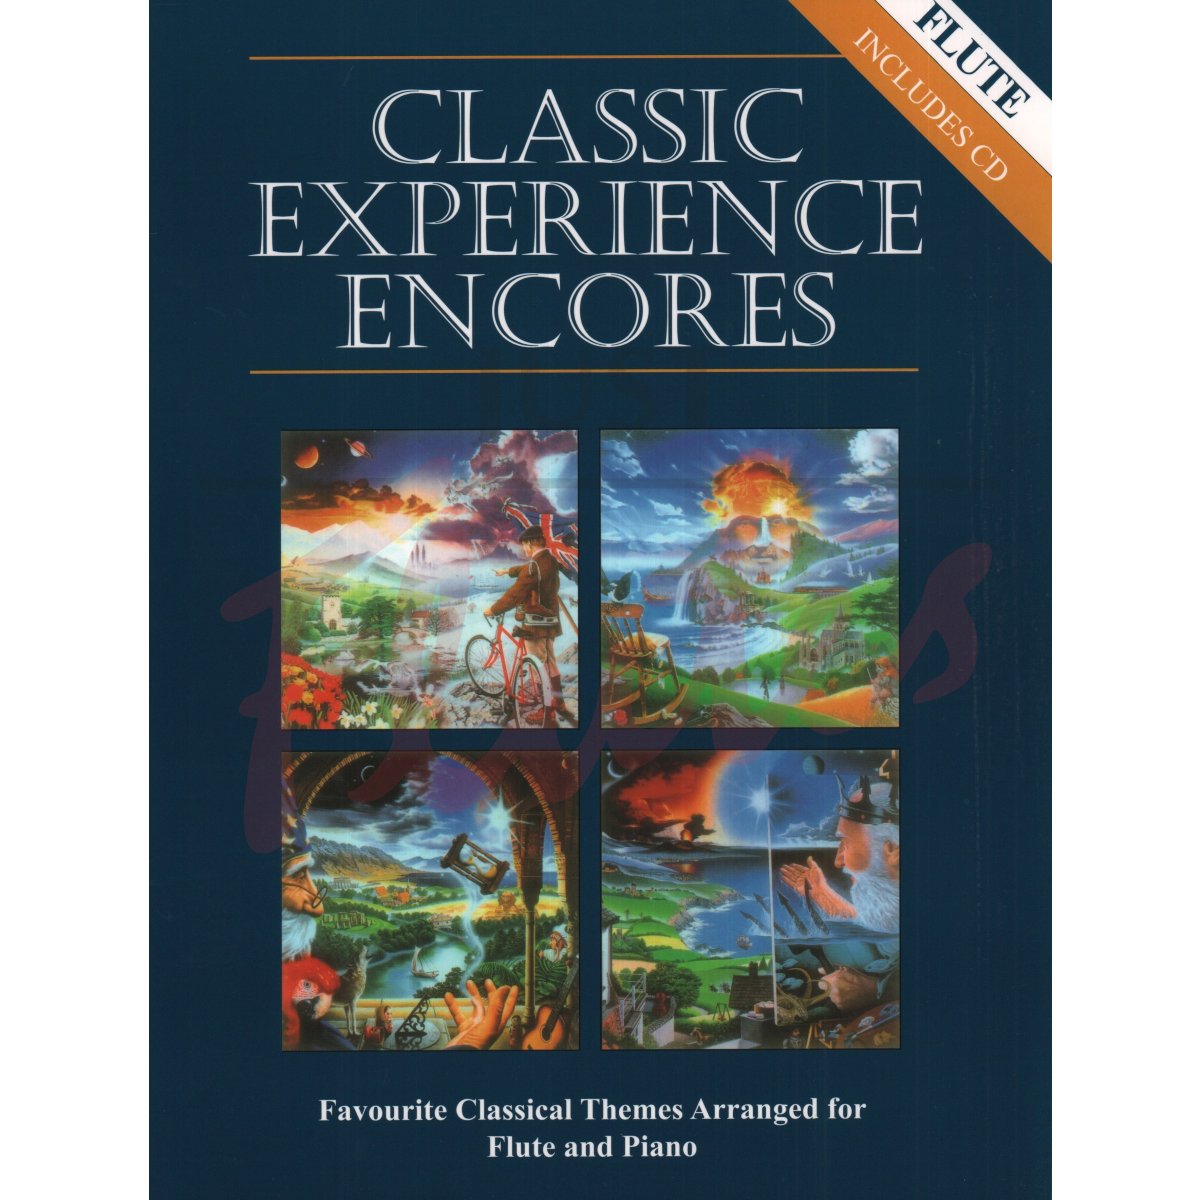 Classic Experience Encores for Flute and Piano